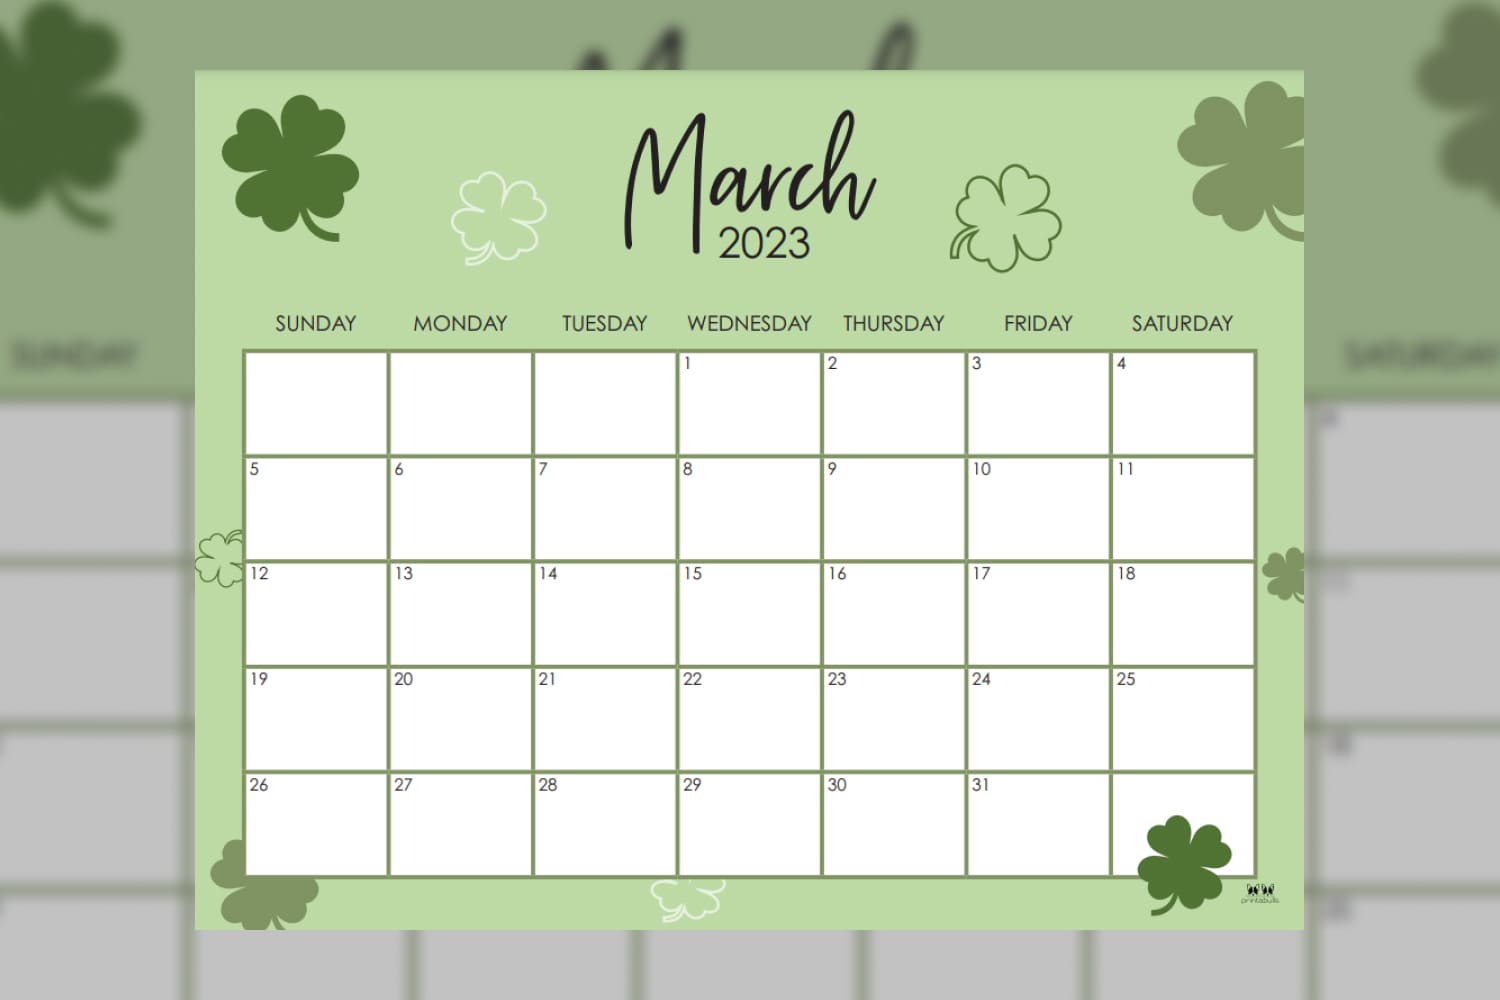 March calendar with green leaves and simple green-and-white color scheme.